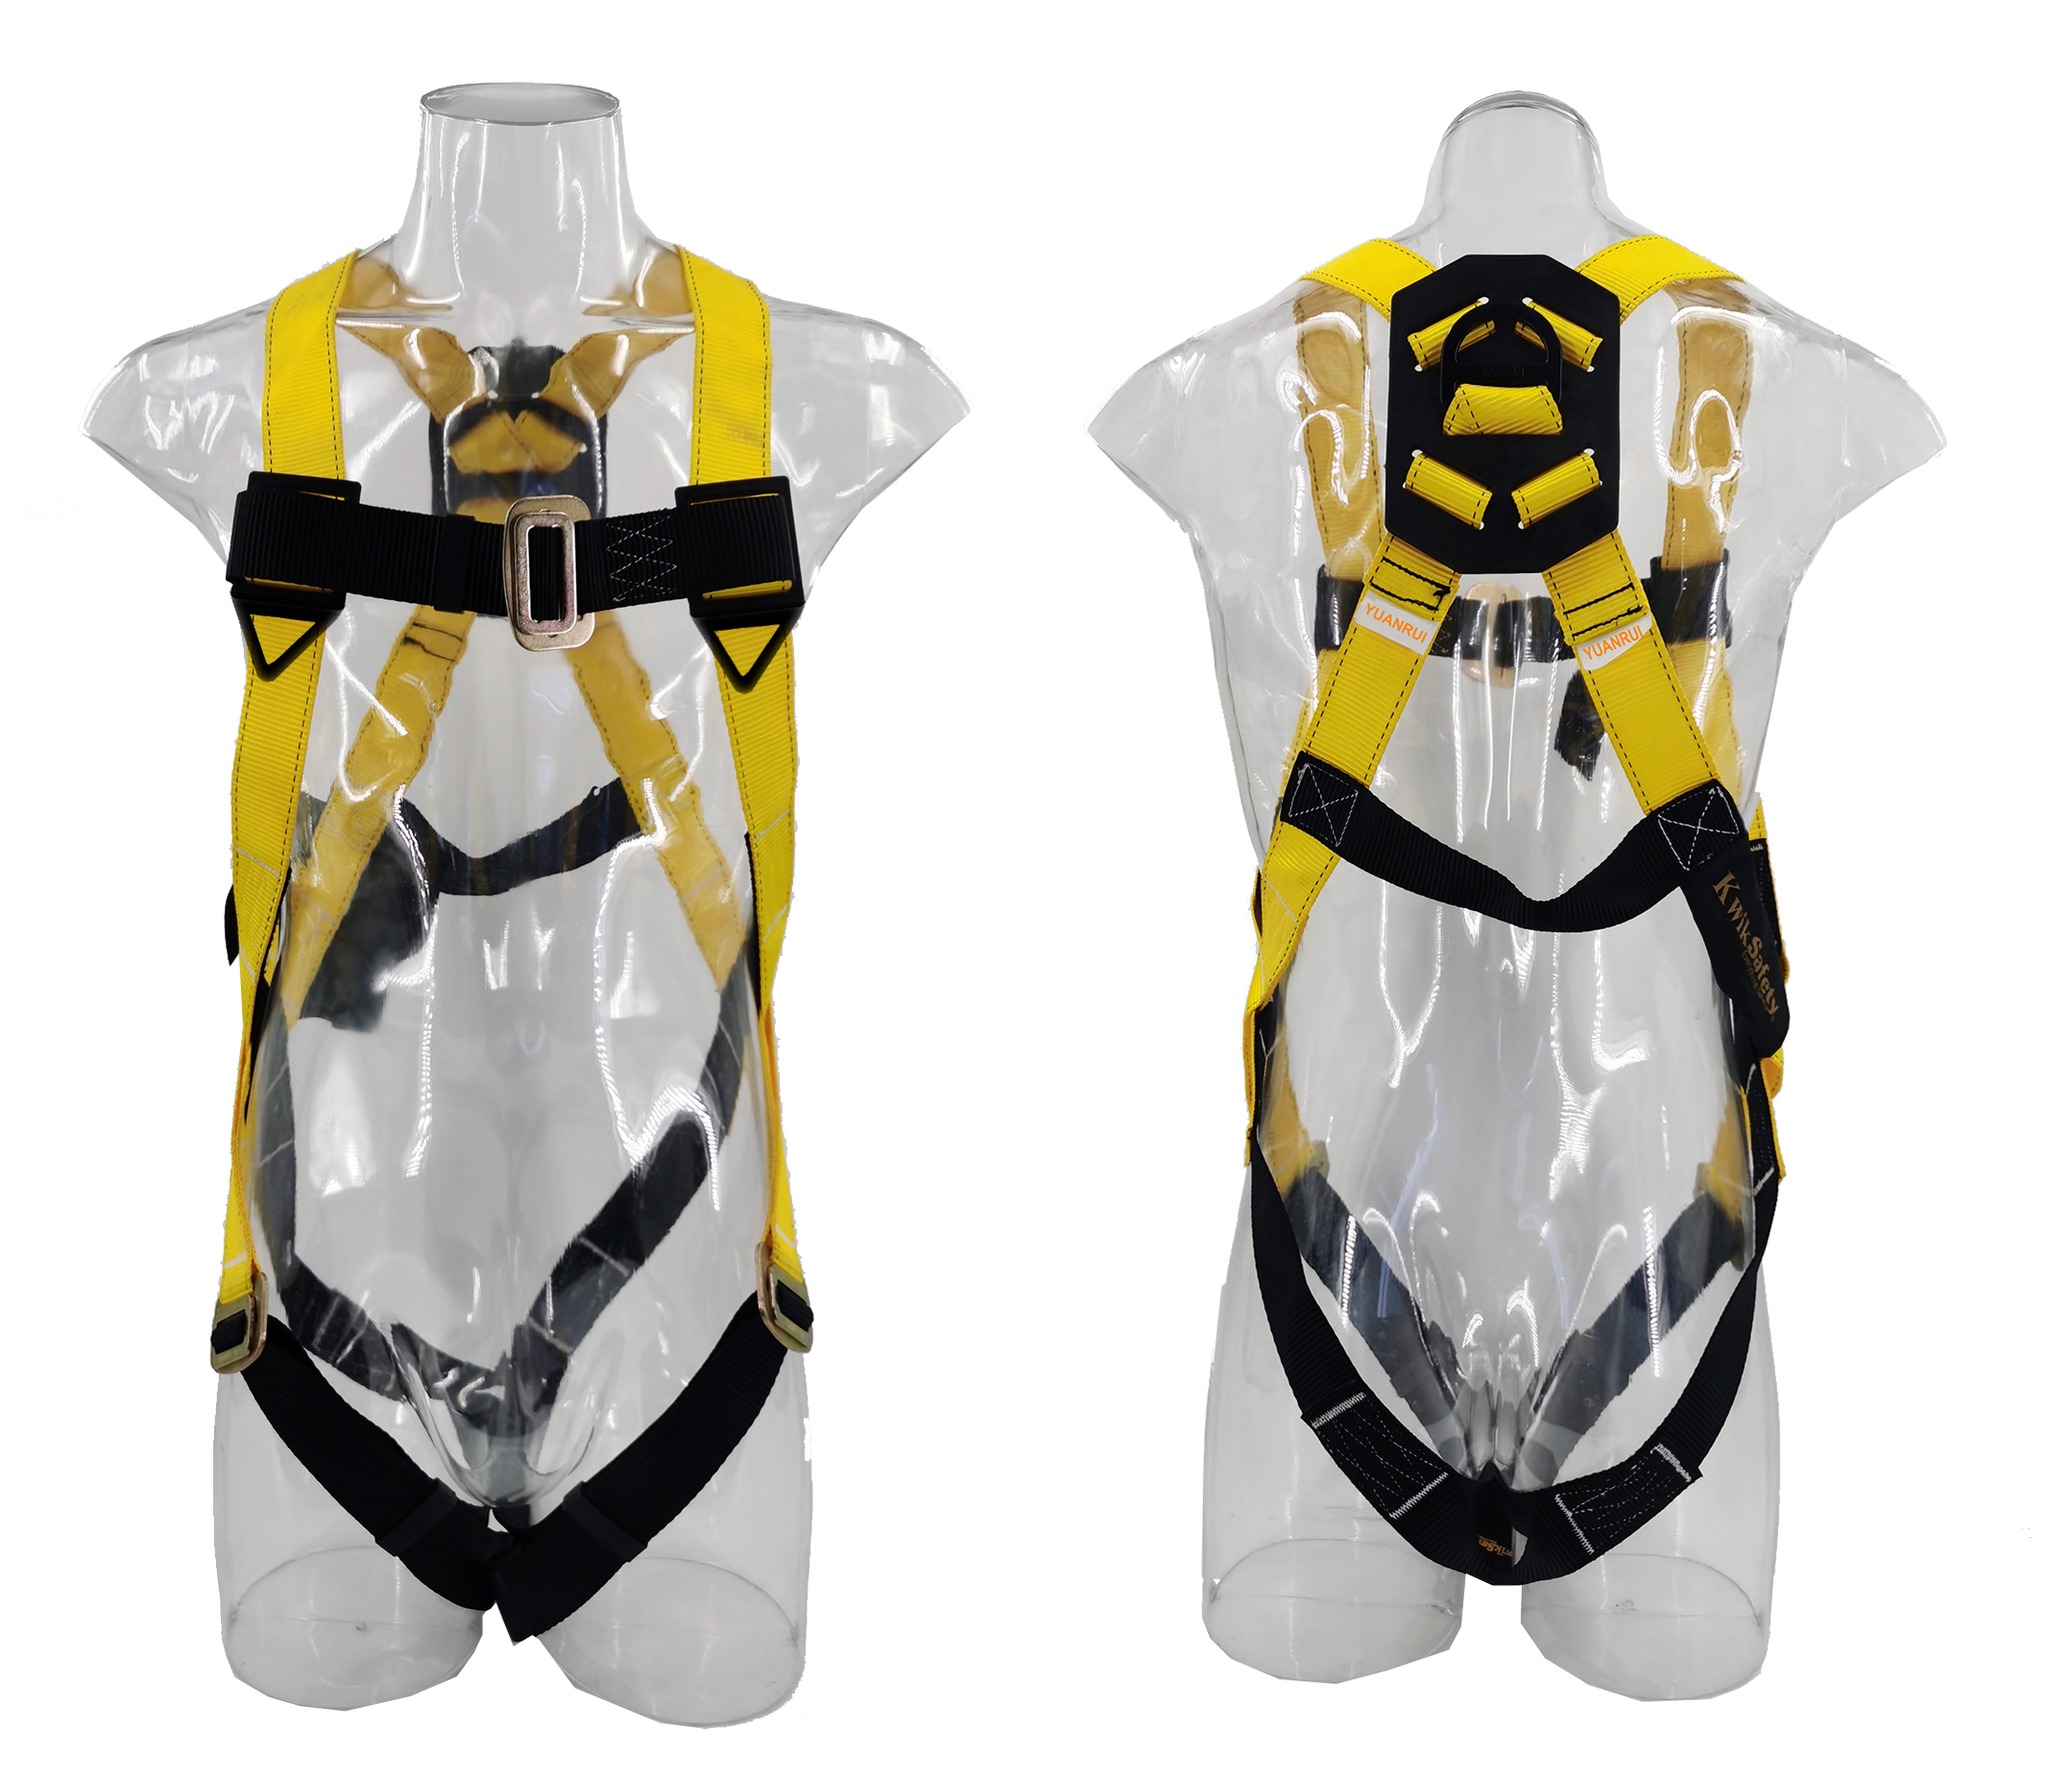 QS601 Fall Protection Full Body Harness 1 D ring 3 Point/3 D ring 3 point Ansi Z359.1